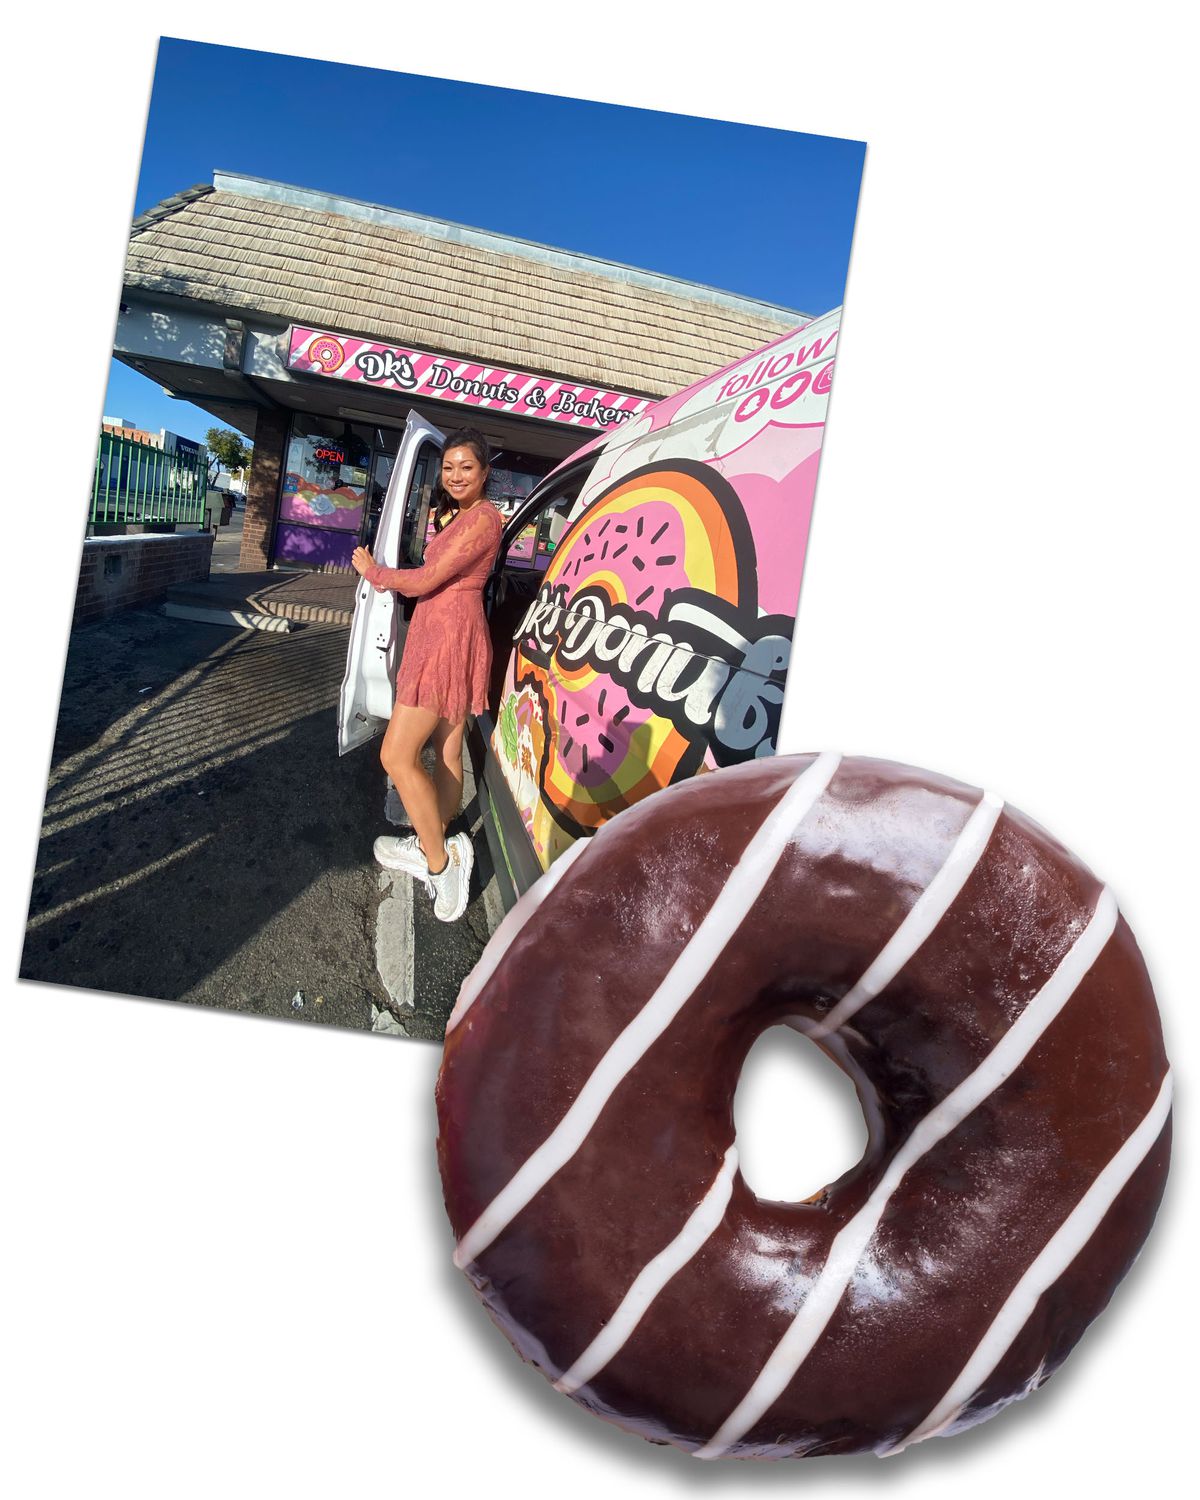 A girl getting out of a van and smiling at DK’s Donuts.